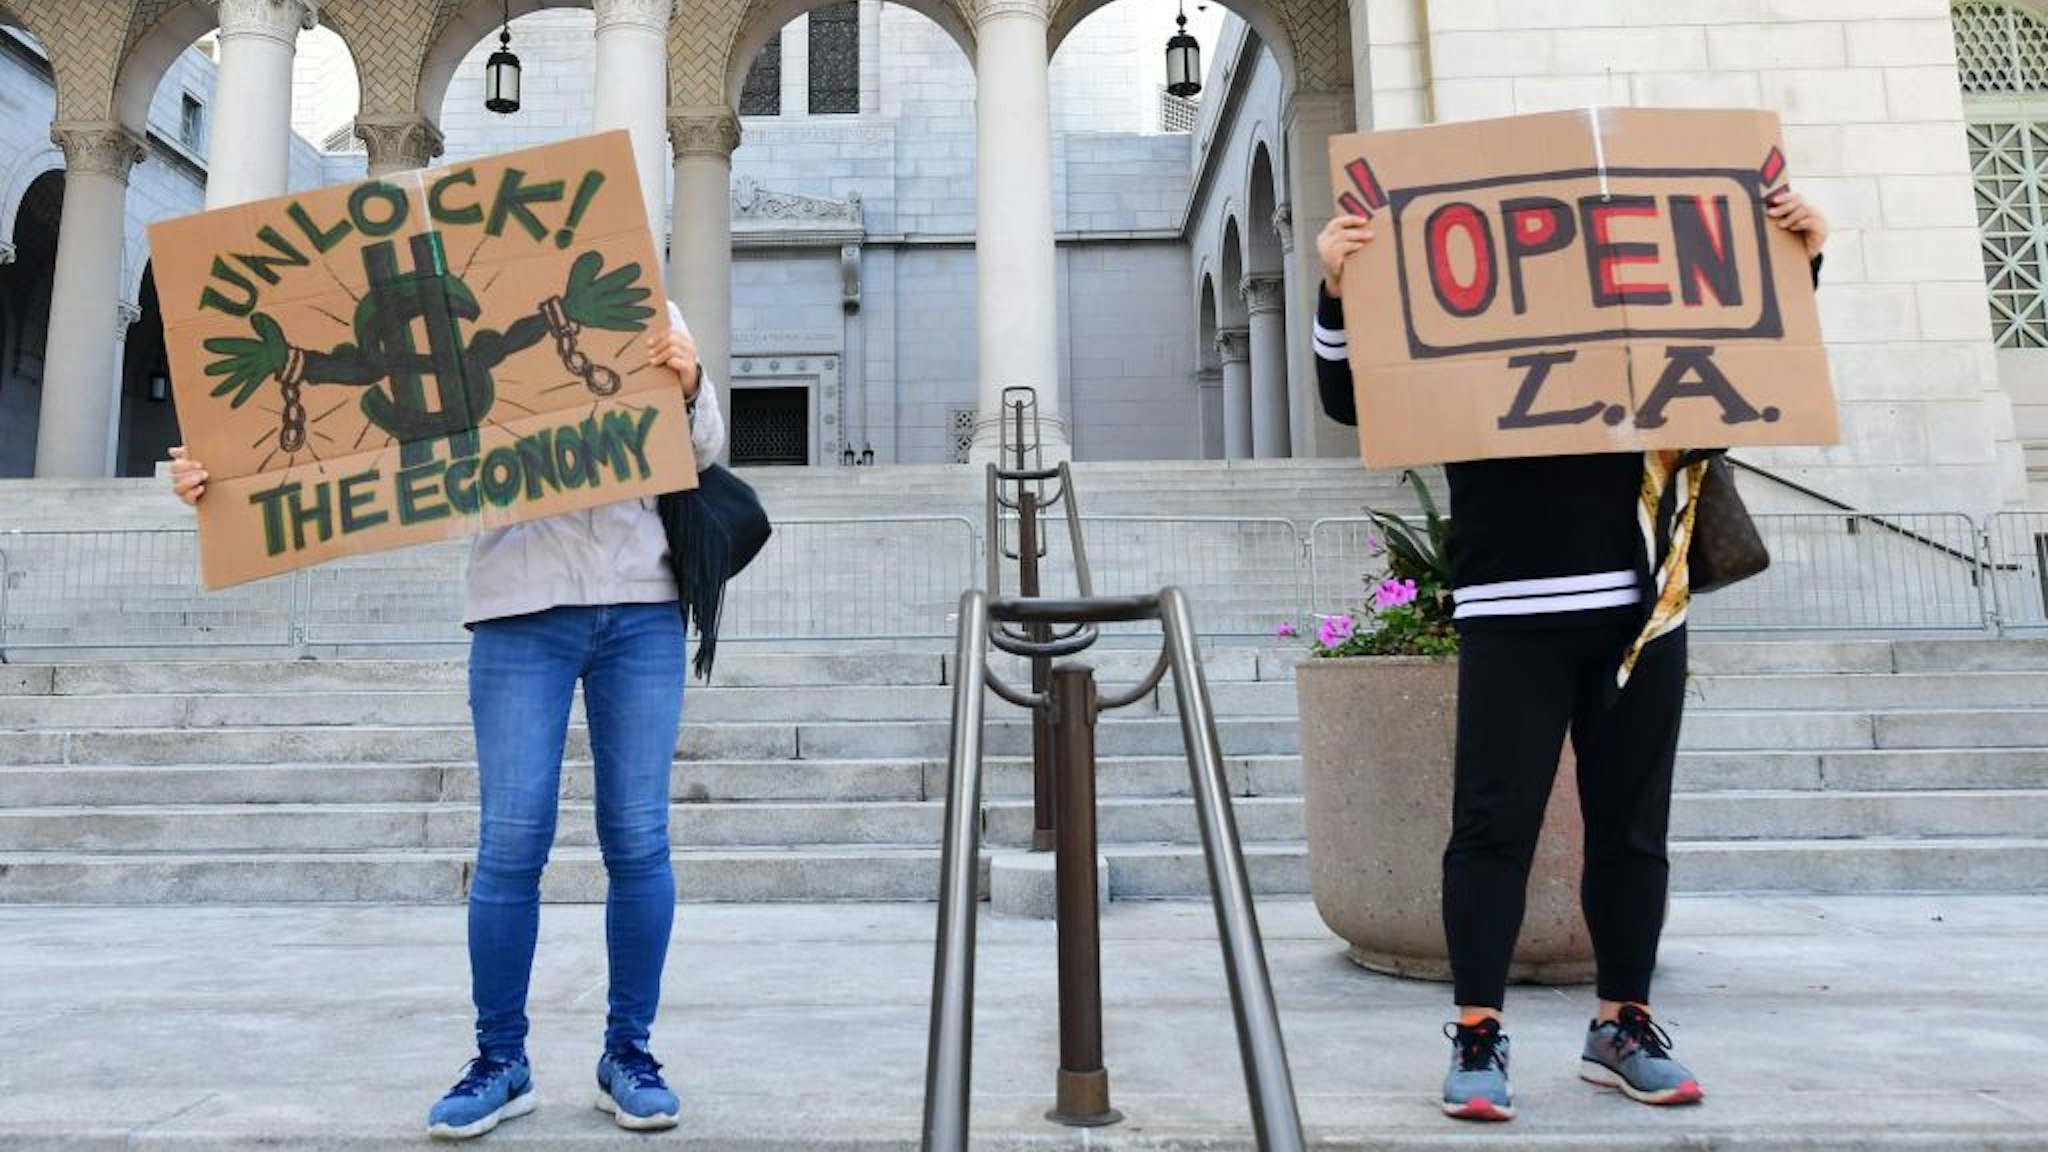 Protestors display placards on the steps of City Hall, demanding the "Stay at Home" order to be lifted and the government to re-open the state during an "Open California" rally in downtown Los Angeles, on April 22, 2020. - Over the past week there have been scattered protests in several US states against confinement measures, from New Hampshire, Maryland and Pennsylvania to Texas and California. (Photo by Frederic J. BROWN / AFP) (Photo by FREDERIC J. BROWN/AFP via Getty Images)